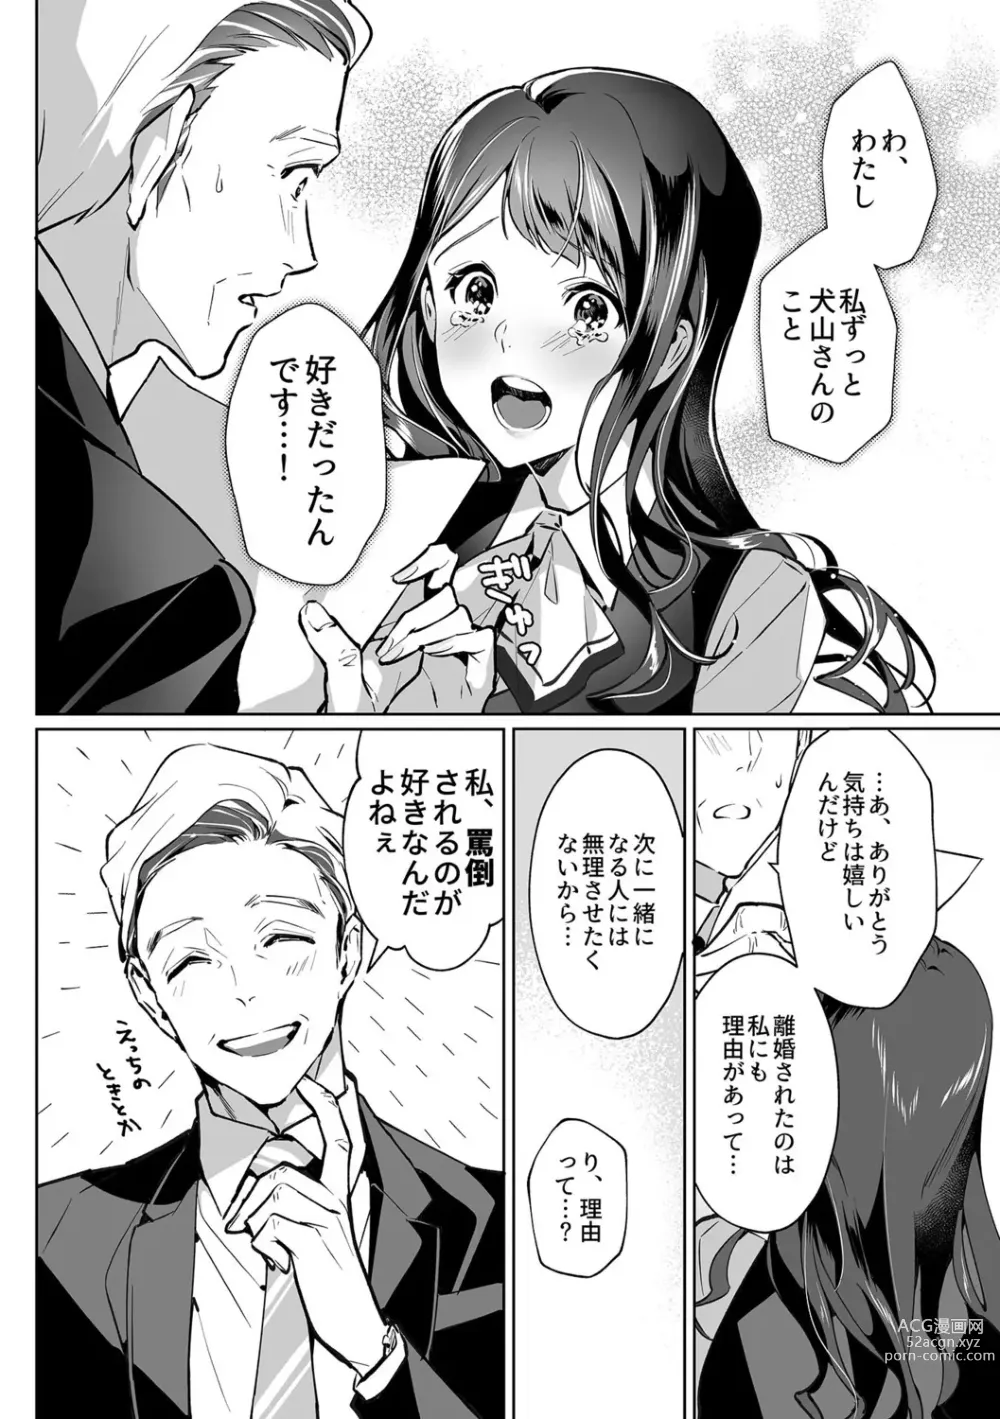 Page 6 of manga Marias Promise Master-servant relationship between me and my boss